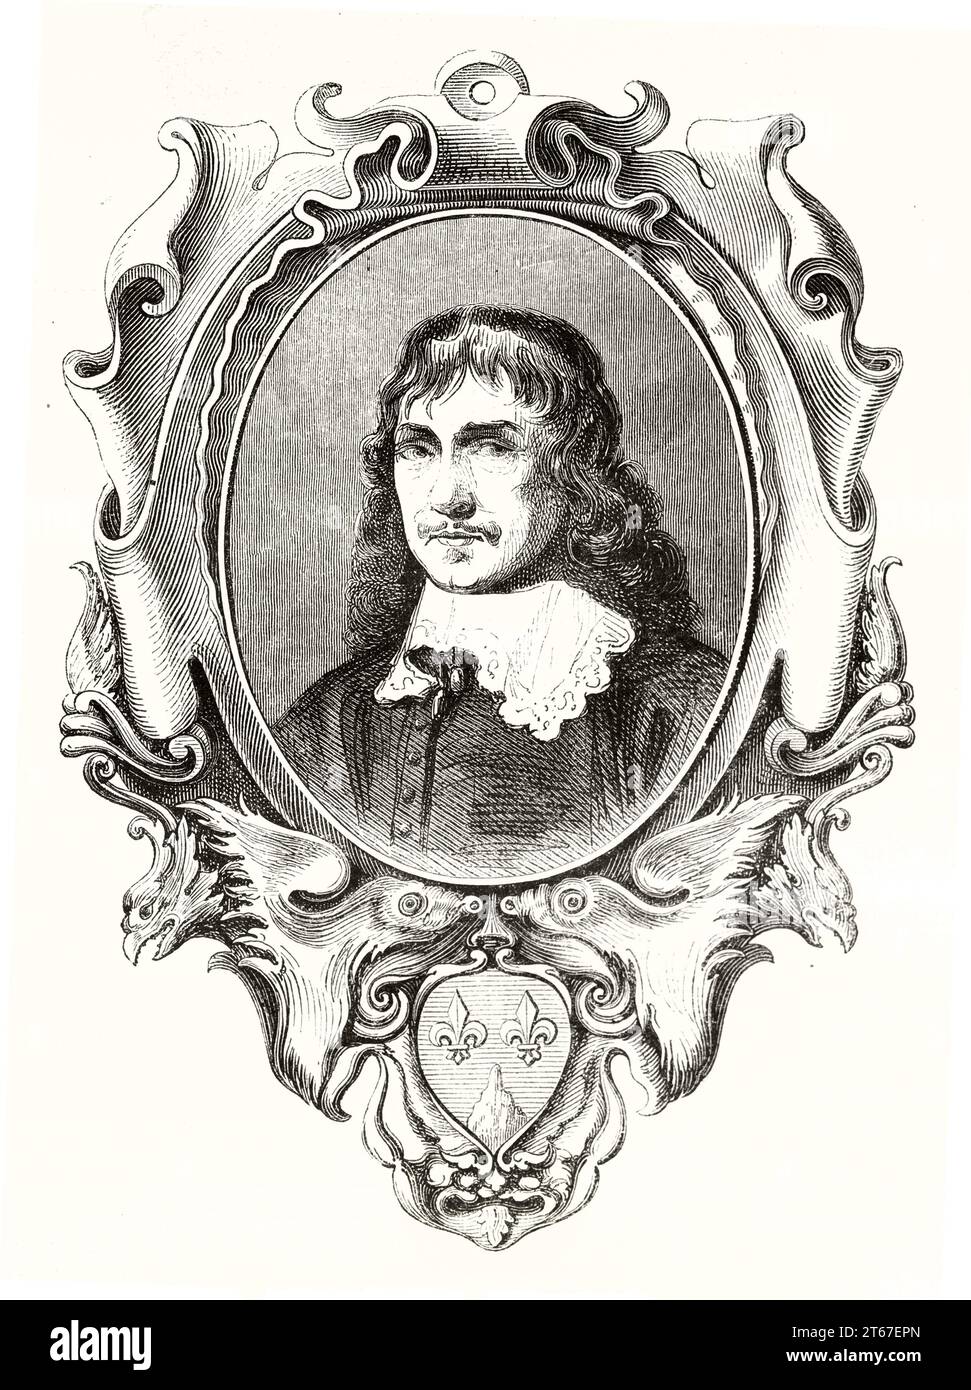 Old engraved self-portrait of Wenceslaus Hollar (1607 – 1677), Bohemian etcher. Publ. on Magasin Pittoresque, Paris, 1851 Stock Photo